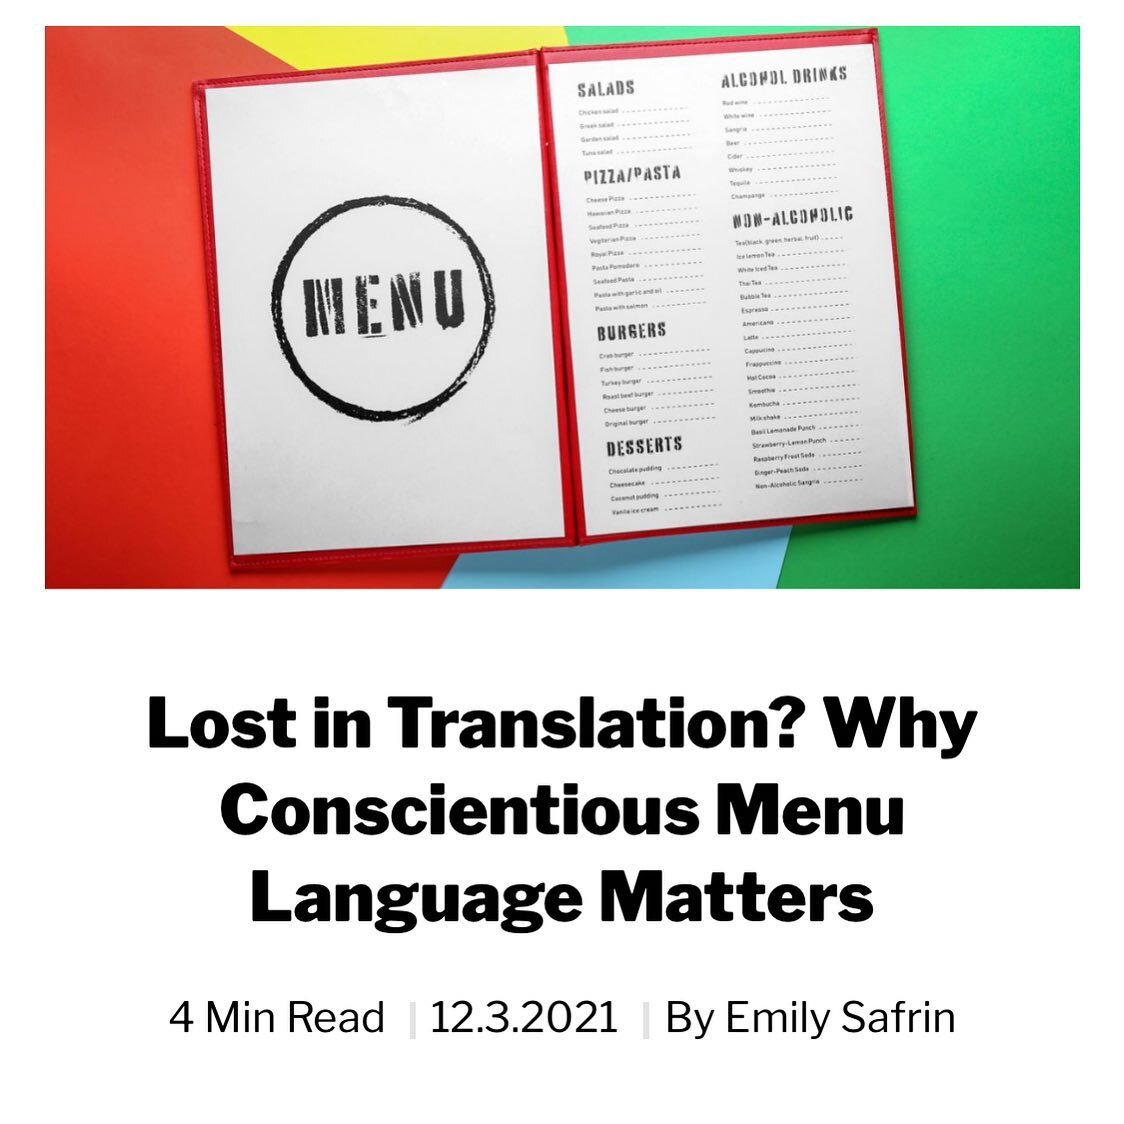 Last month I published this article (link in bio) about food translation in which I reflected that there are &quot;degrees of contortion (and distortion) when it comes to fitting a dish into a hole shaped like another language and culture.&quot;

If 